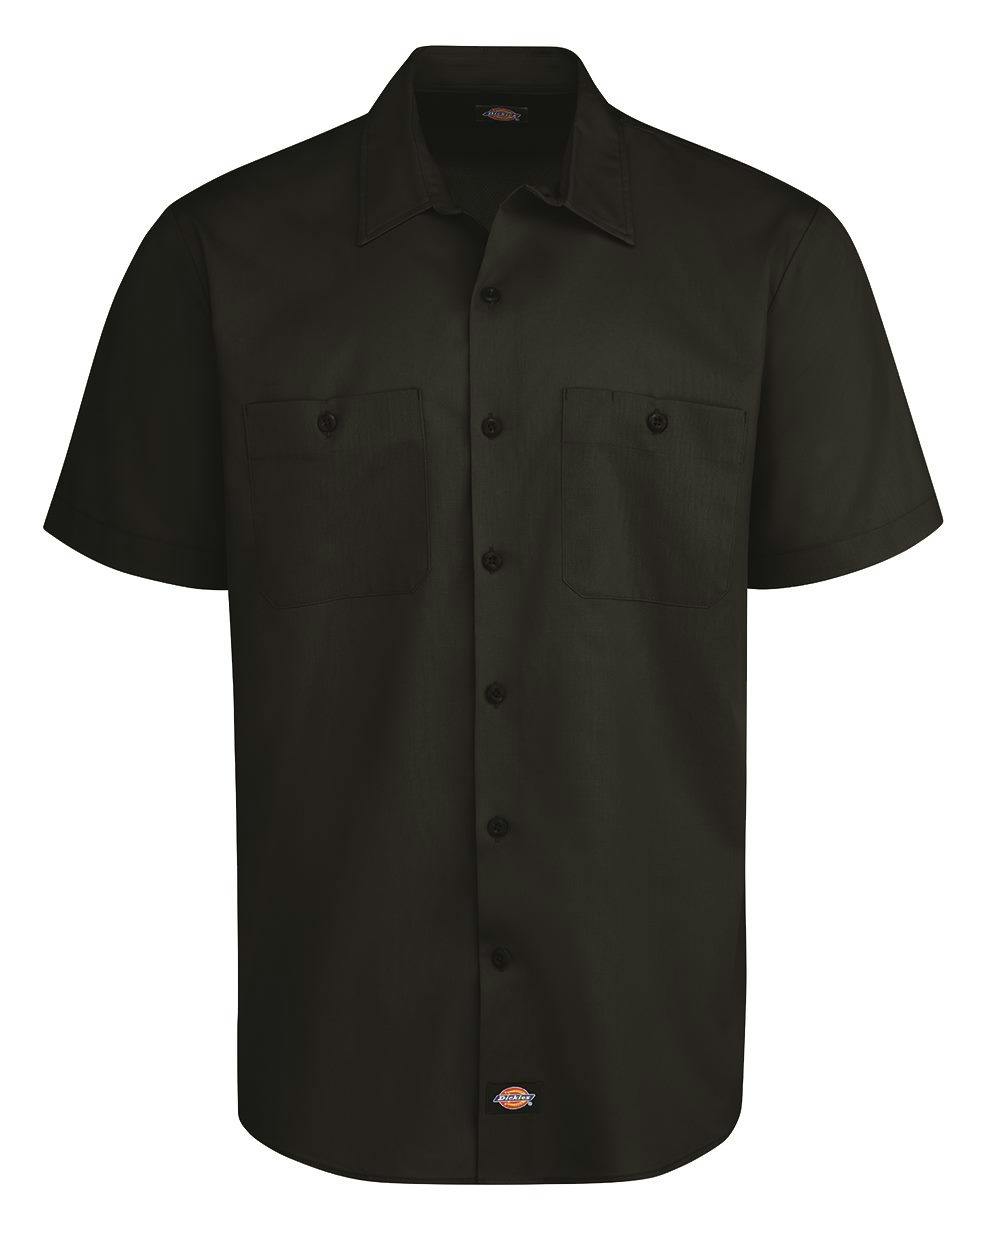 Image for Industrial Worktech Ventilated Short Sleeve Work Shirt - LS51